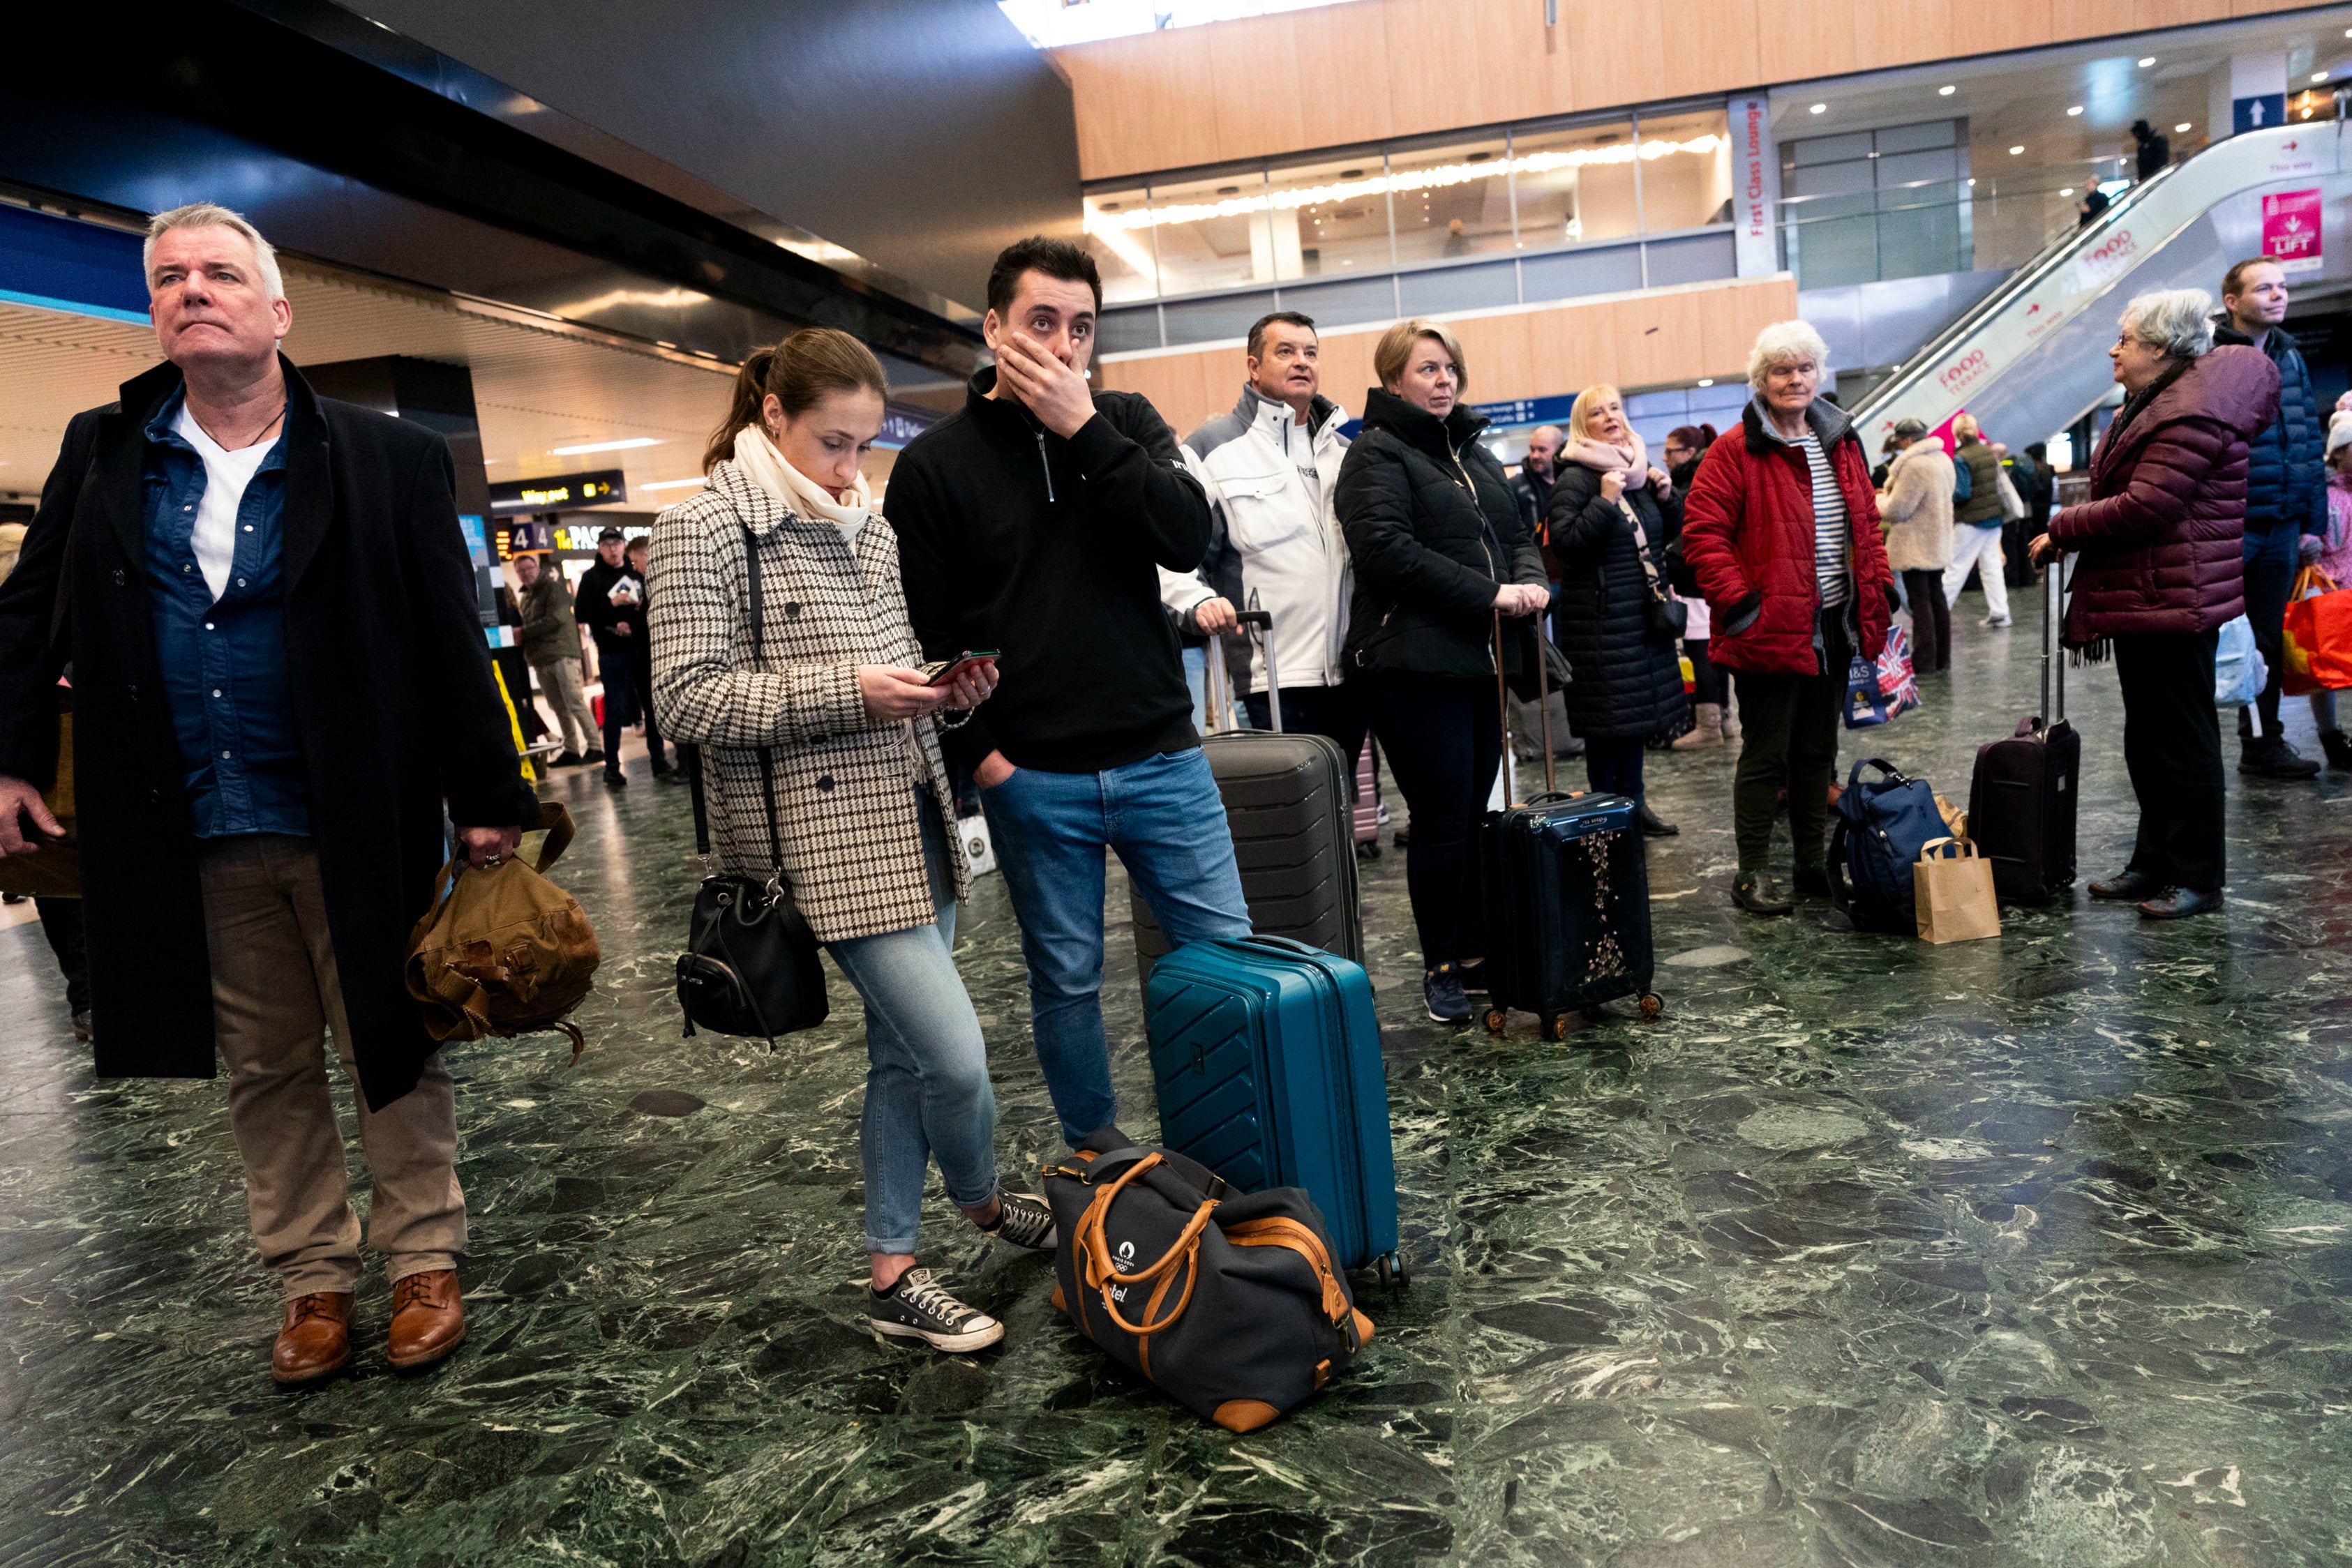 Passengers at Euston station in London facing delays to trains as the Uk is hit by Storm Isha